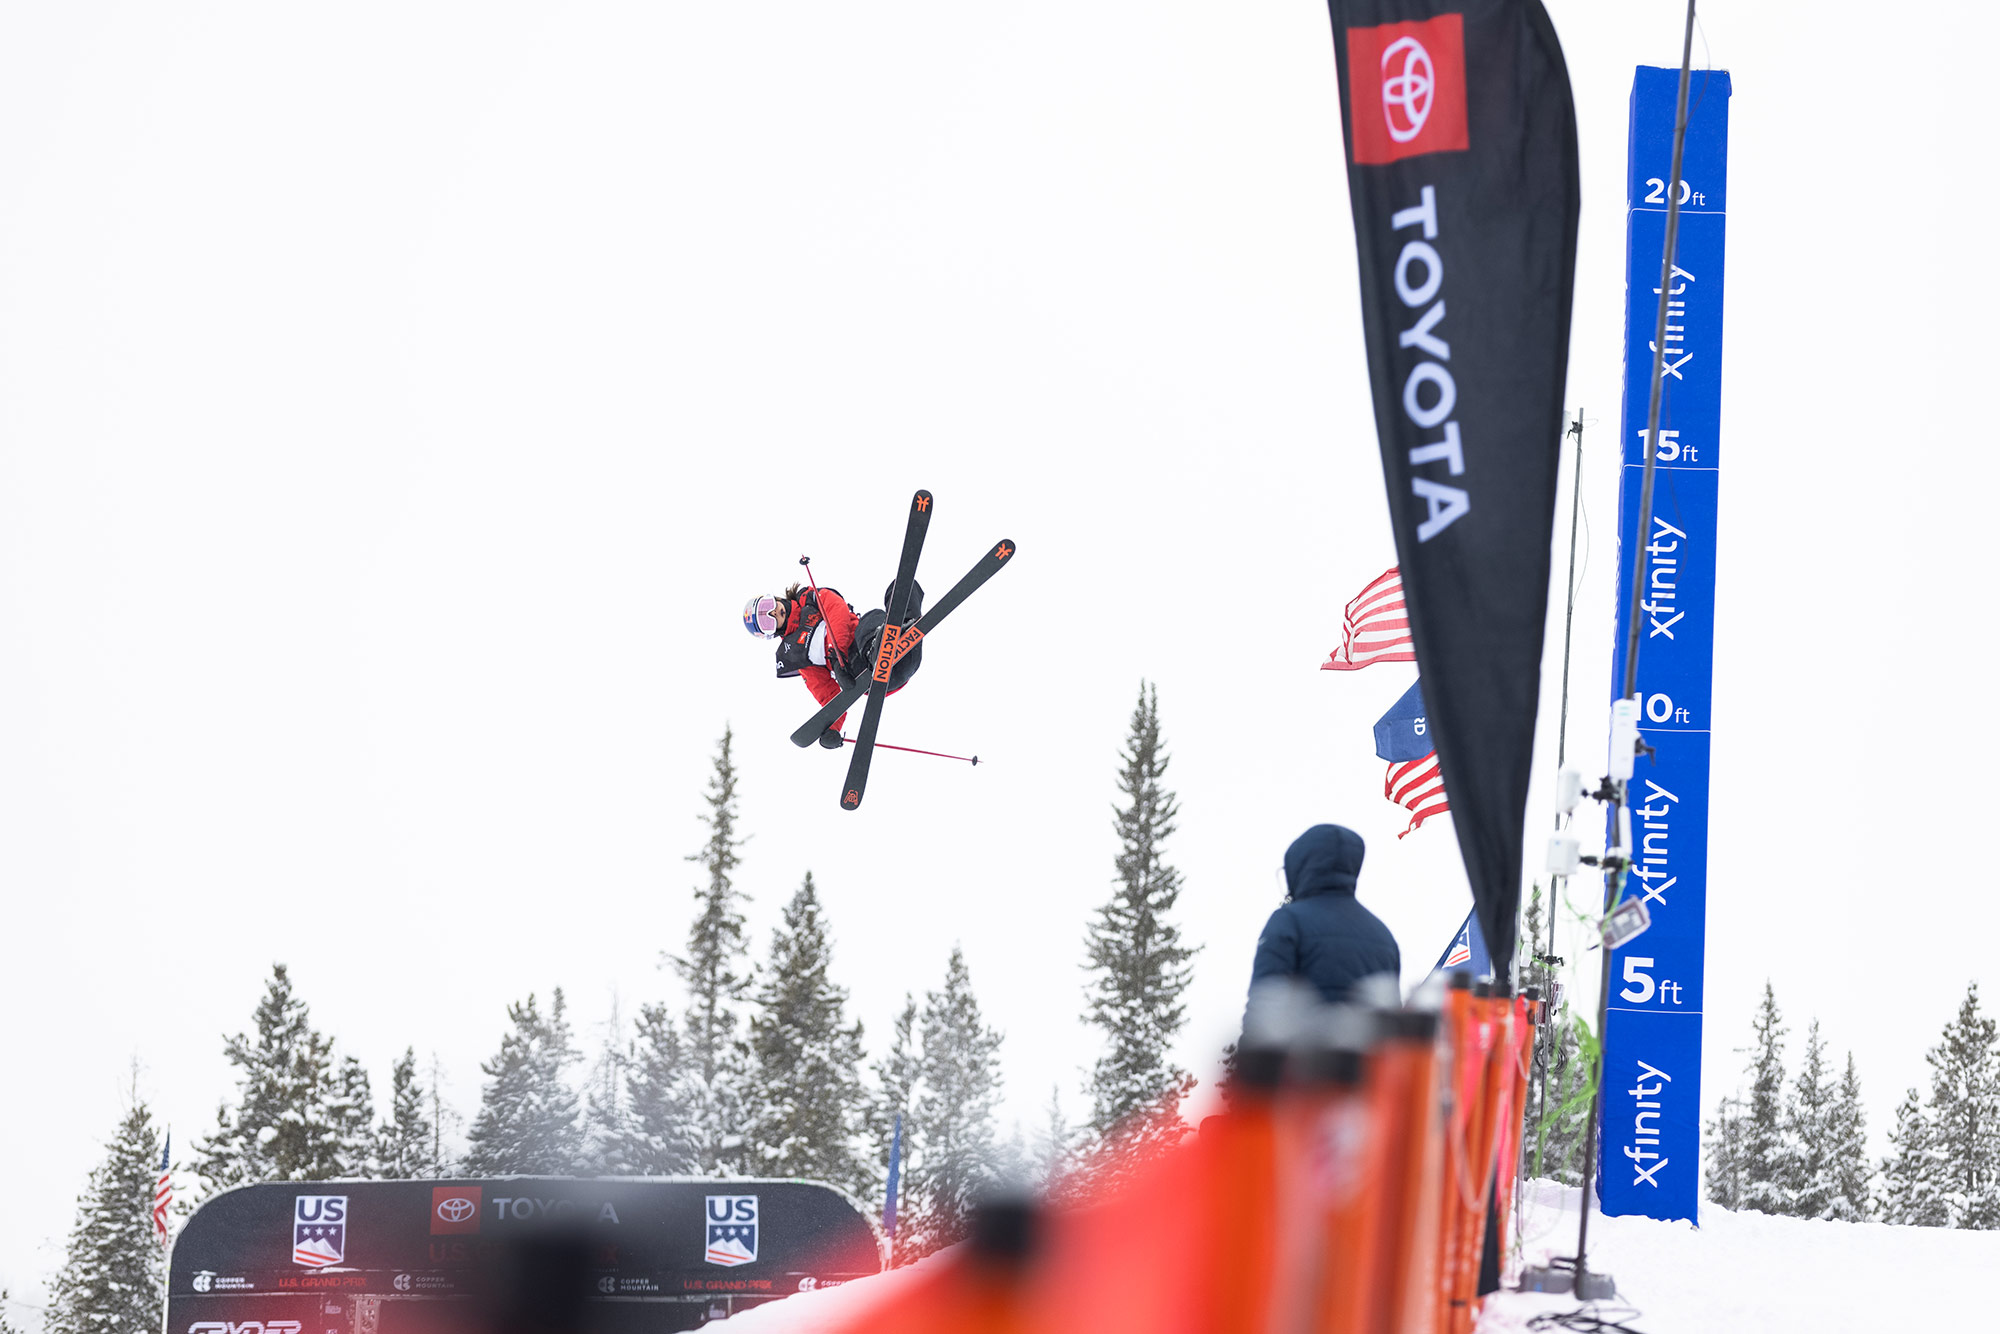 Eileen Gu competing in World Cup halfpipe at the 2021 US Grand Prix at Copper Mountain, Colorado